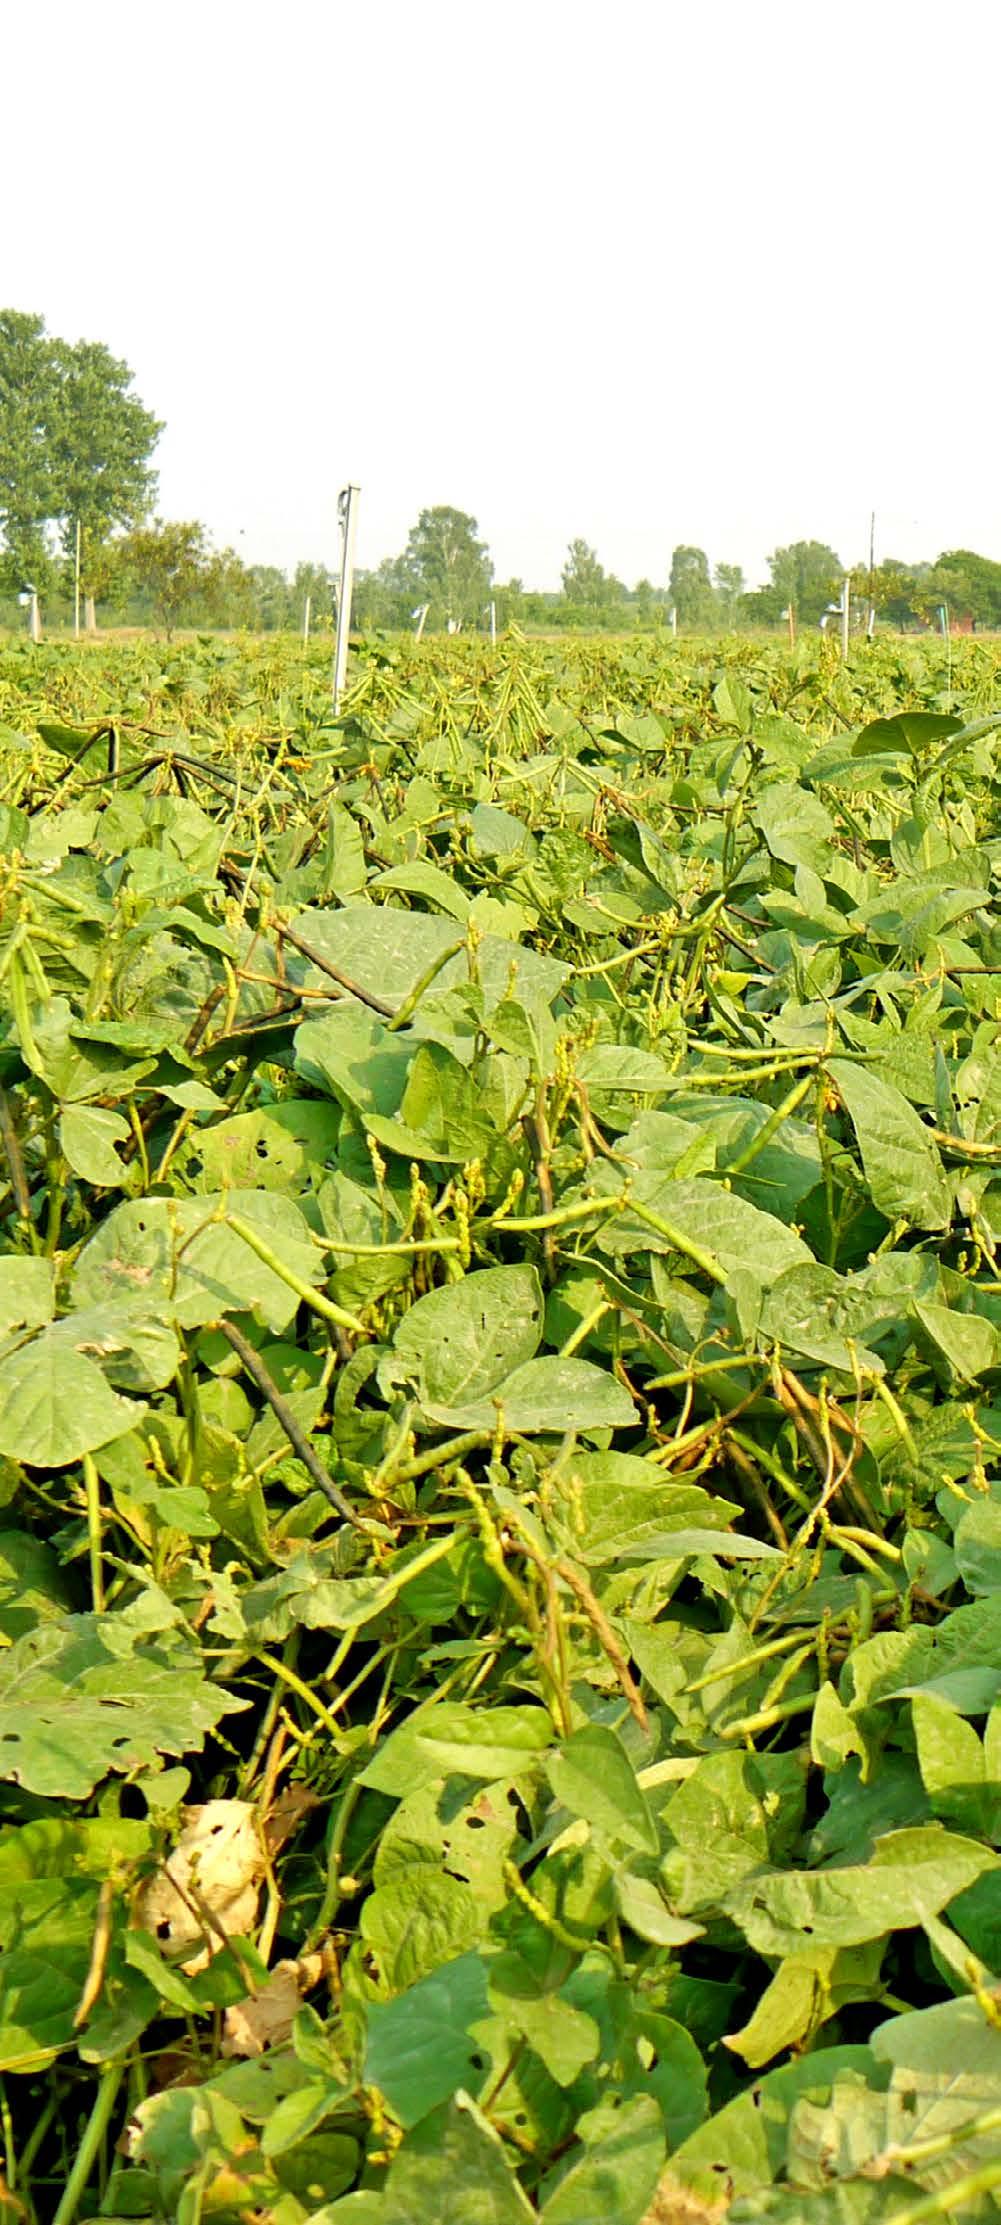 1 MUNGBEAN (Vigna radiata (L.) R. Wilczek var. radiata) is one of the most important food legume crops in South, East and Southeast Asia, where 90% of global production currently takes place.